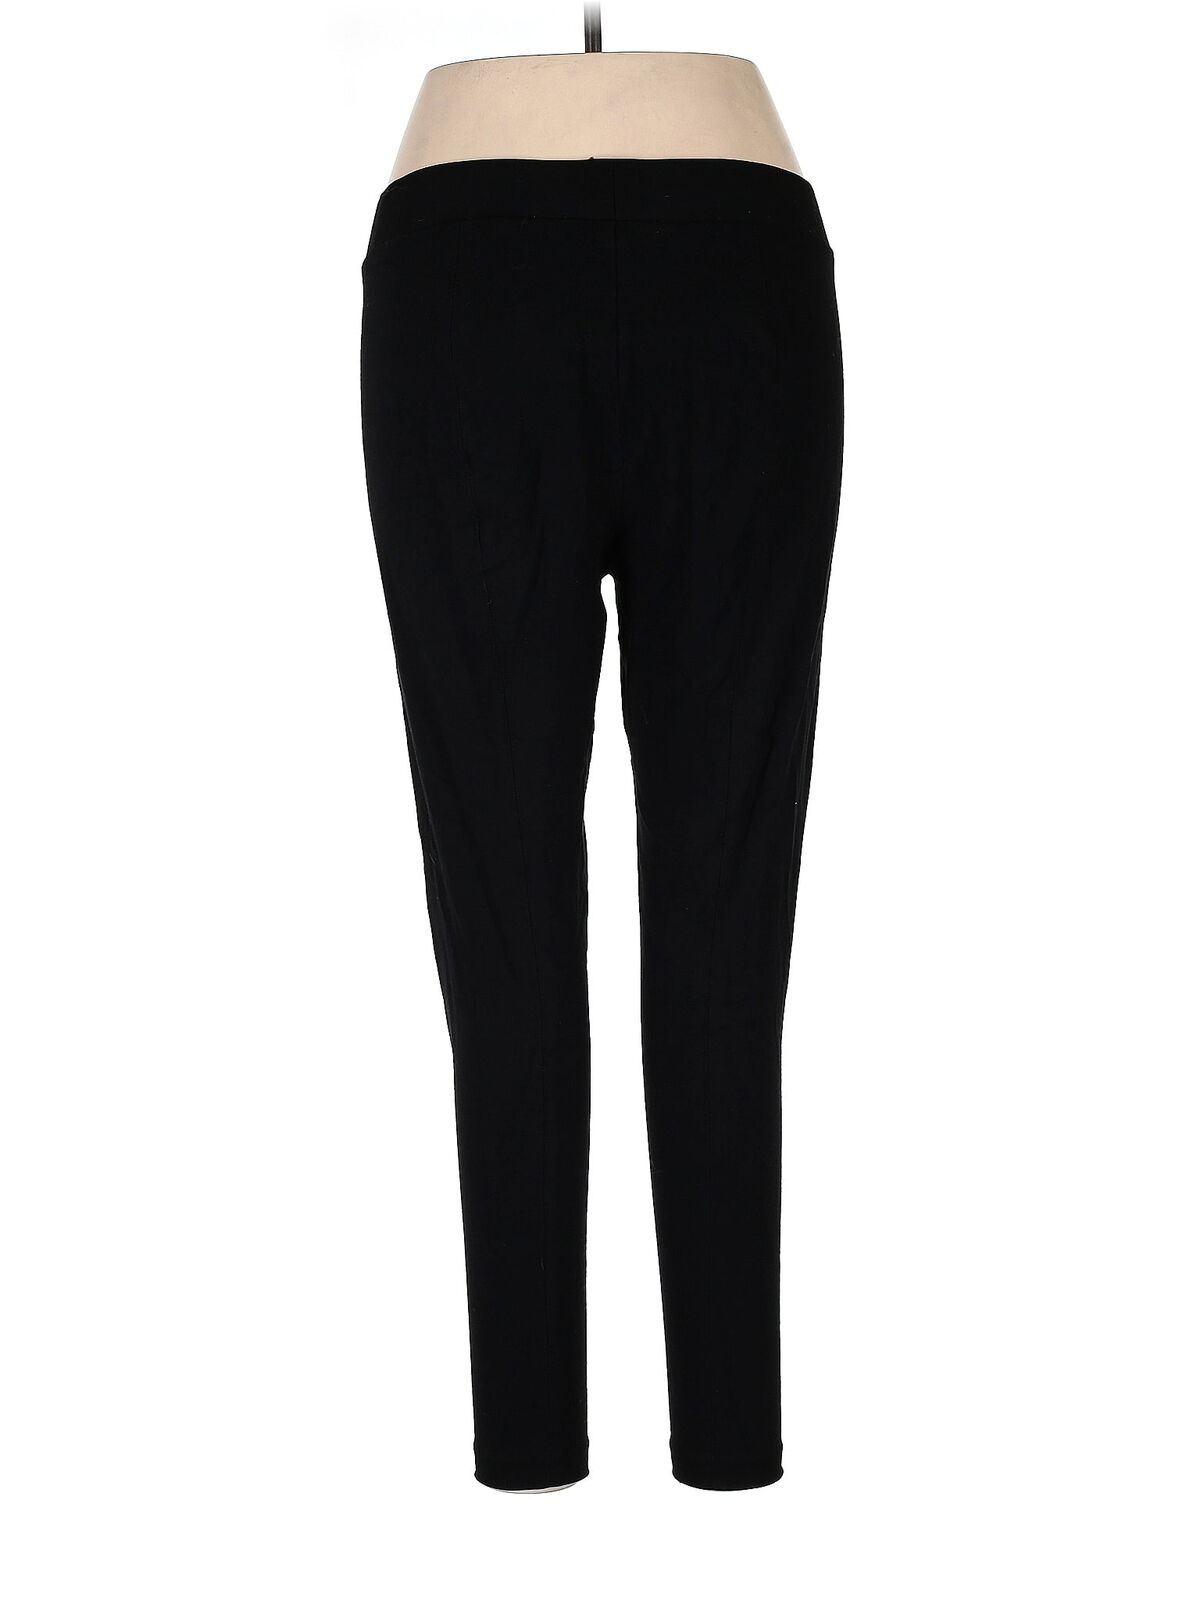 TWO by Vince Camuto Women Black Leggings L - image 2